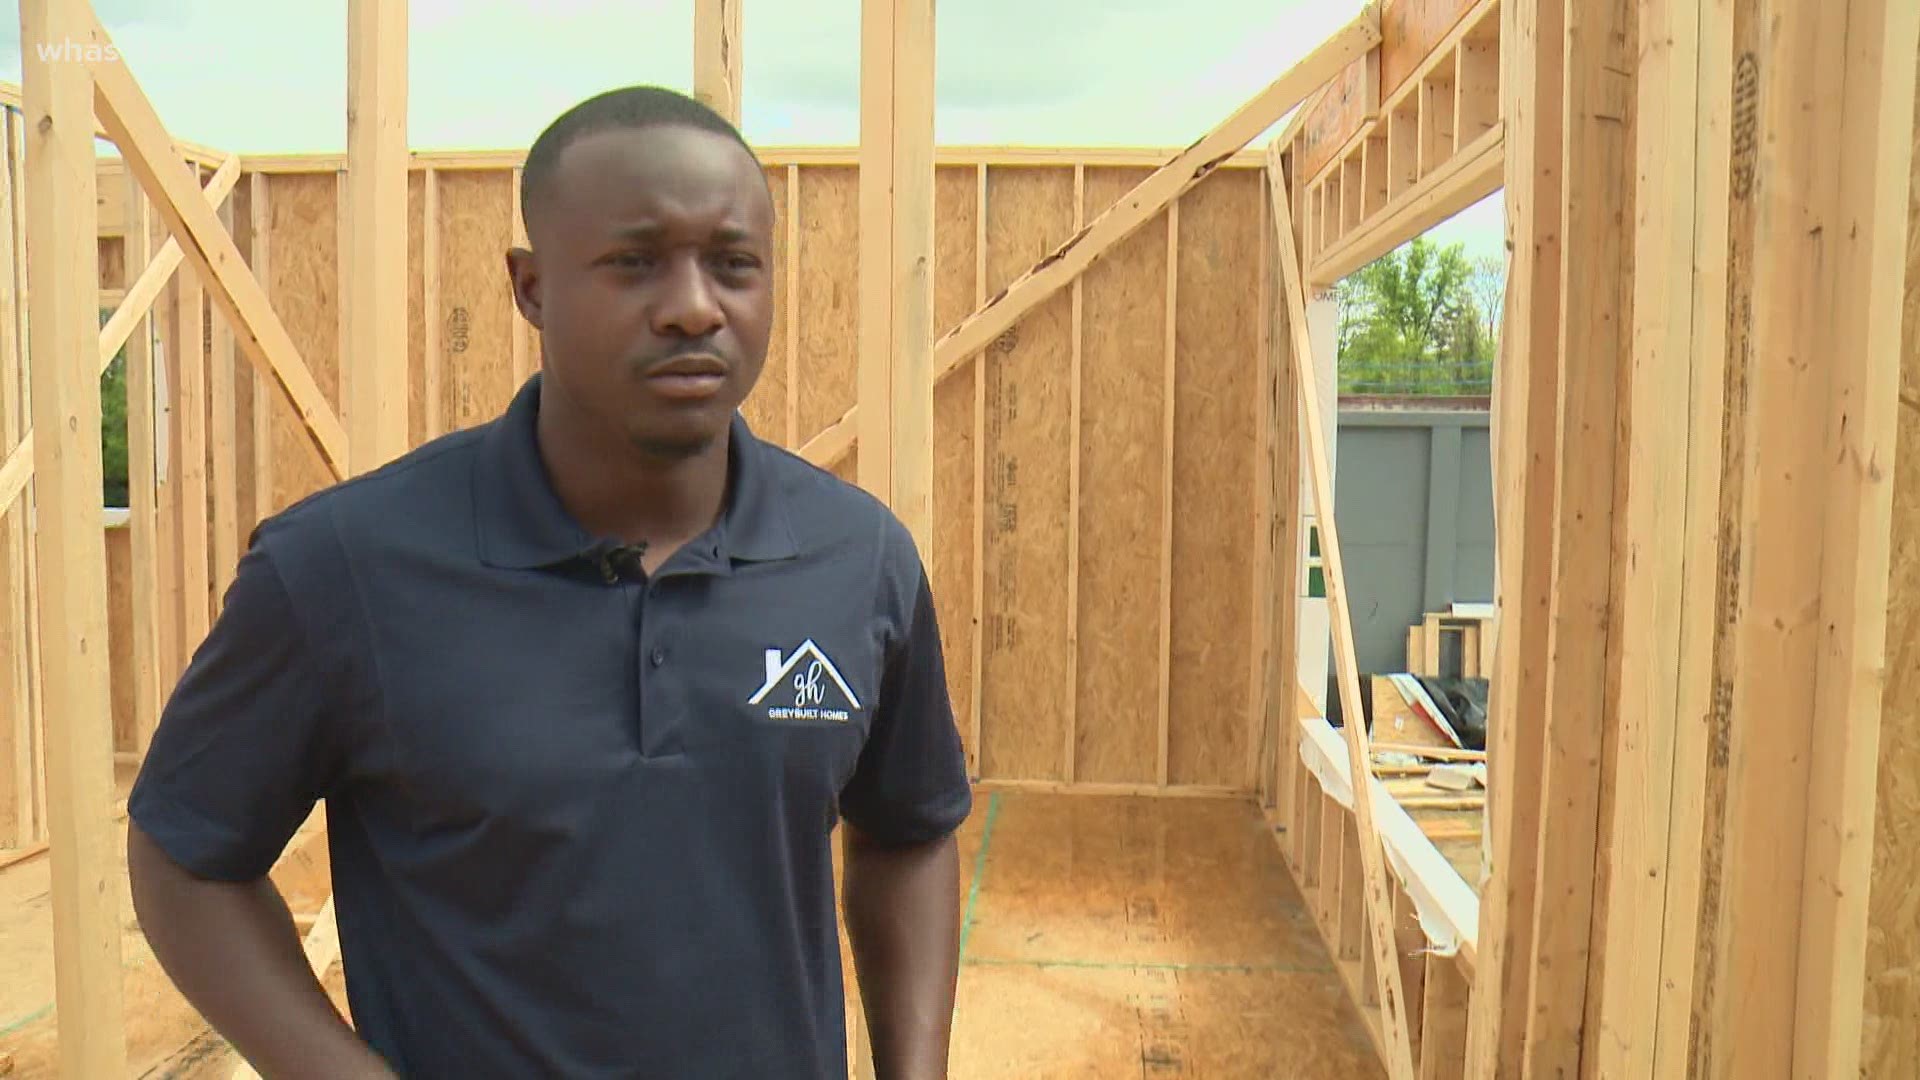 As Bilal Powell awaits to hear what team he will play for this NFL season, he continues to build--homes that is.